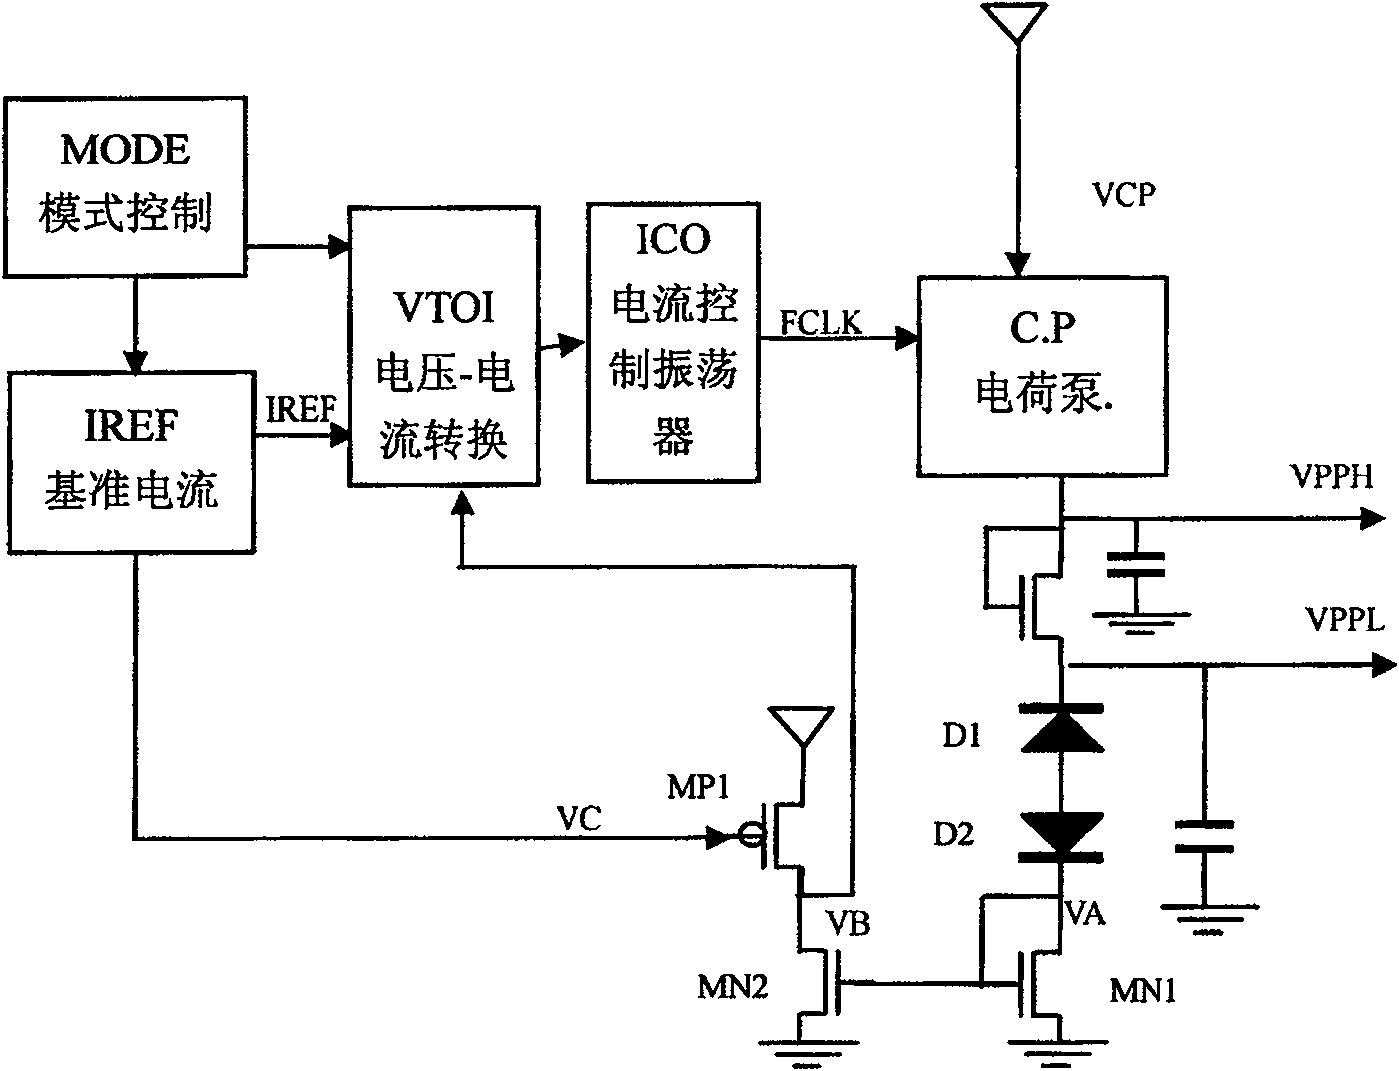 Electric charge pump for controlling power consumption by voltage controlled oscillator